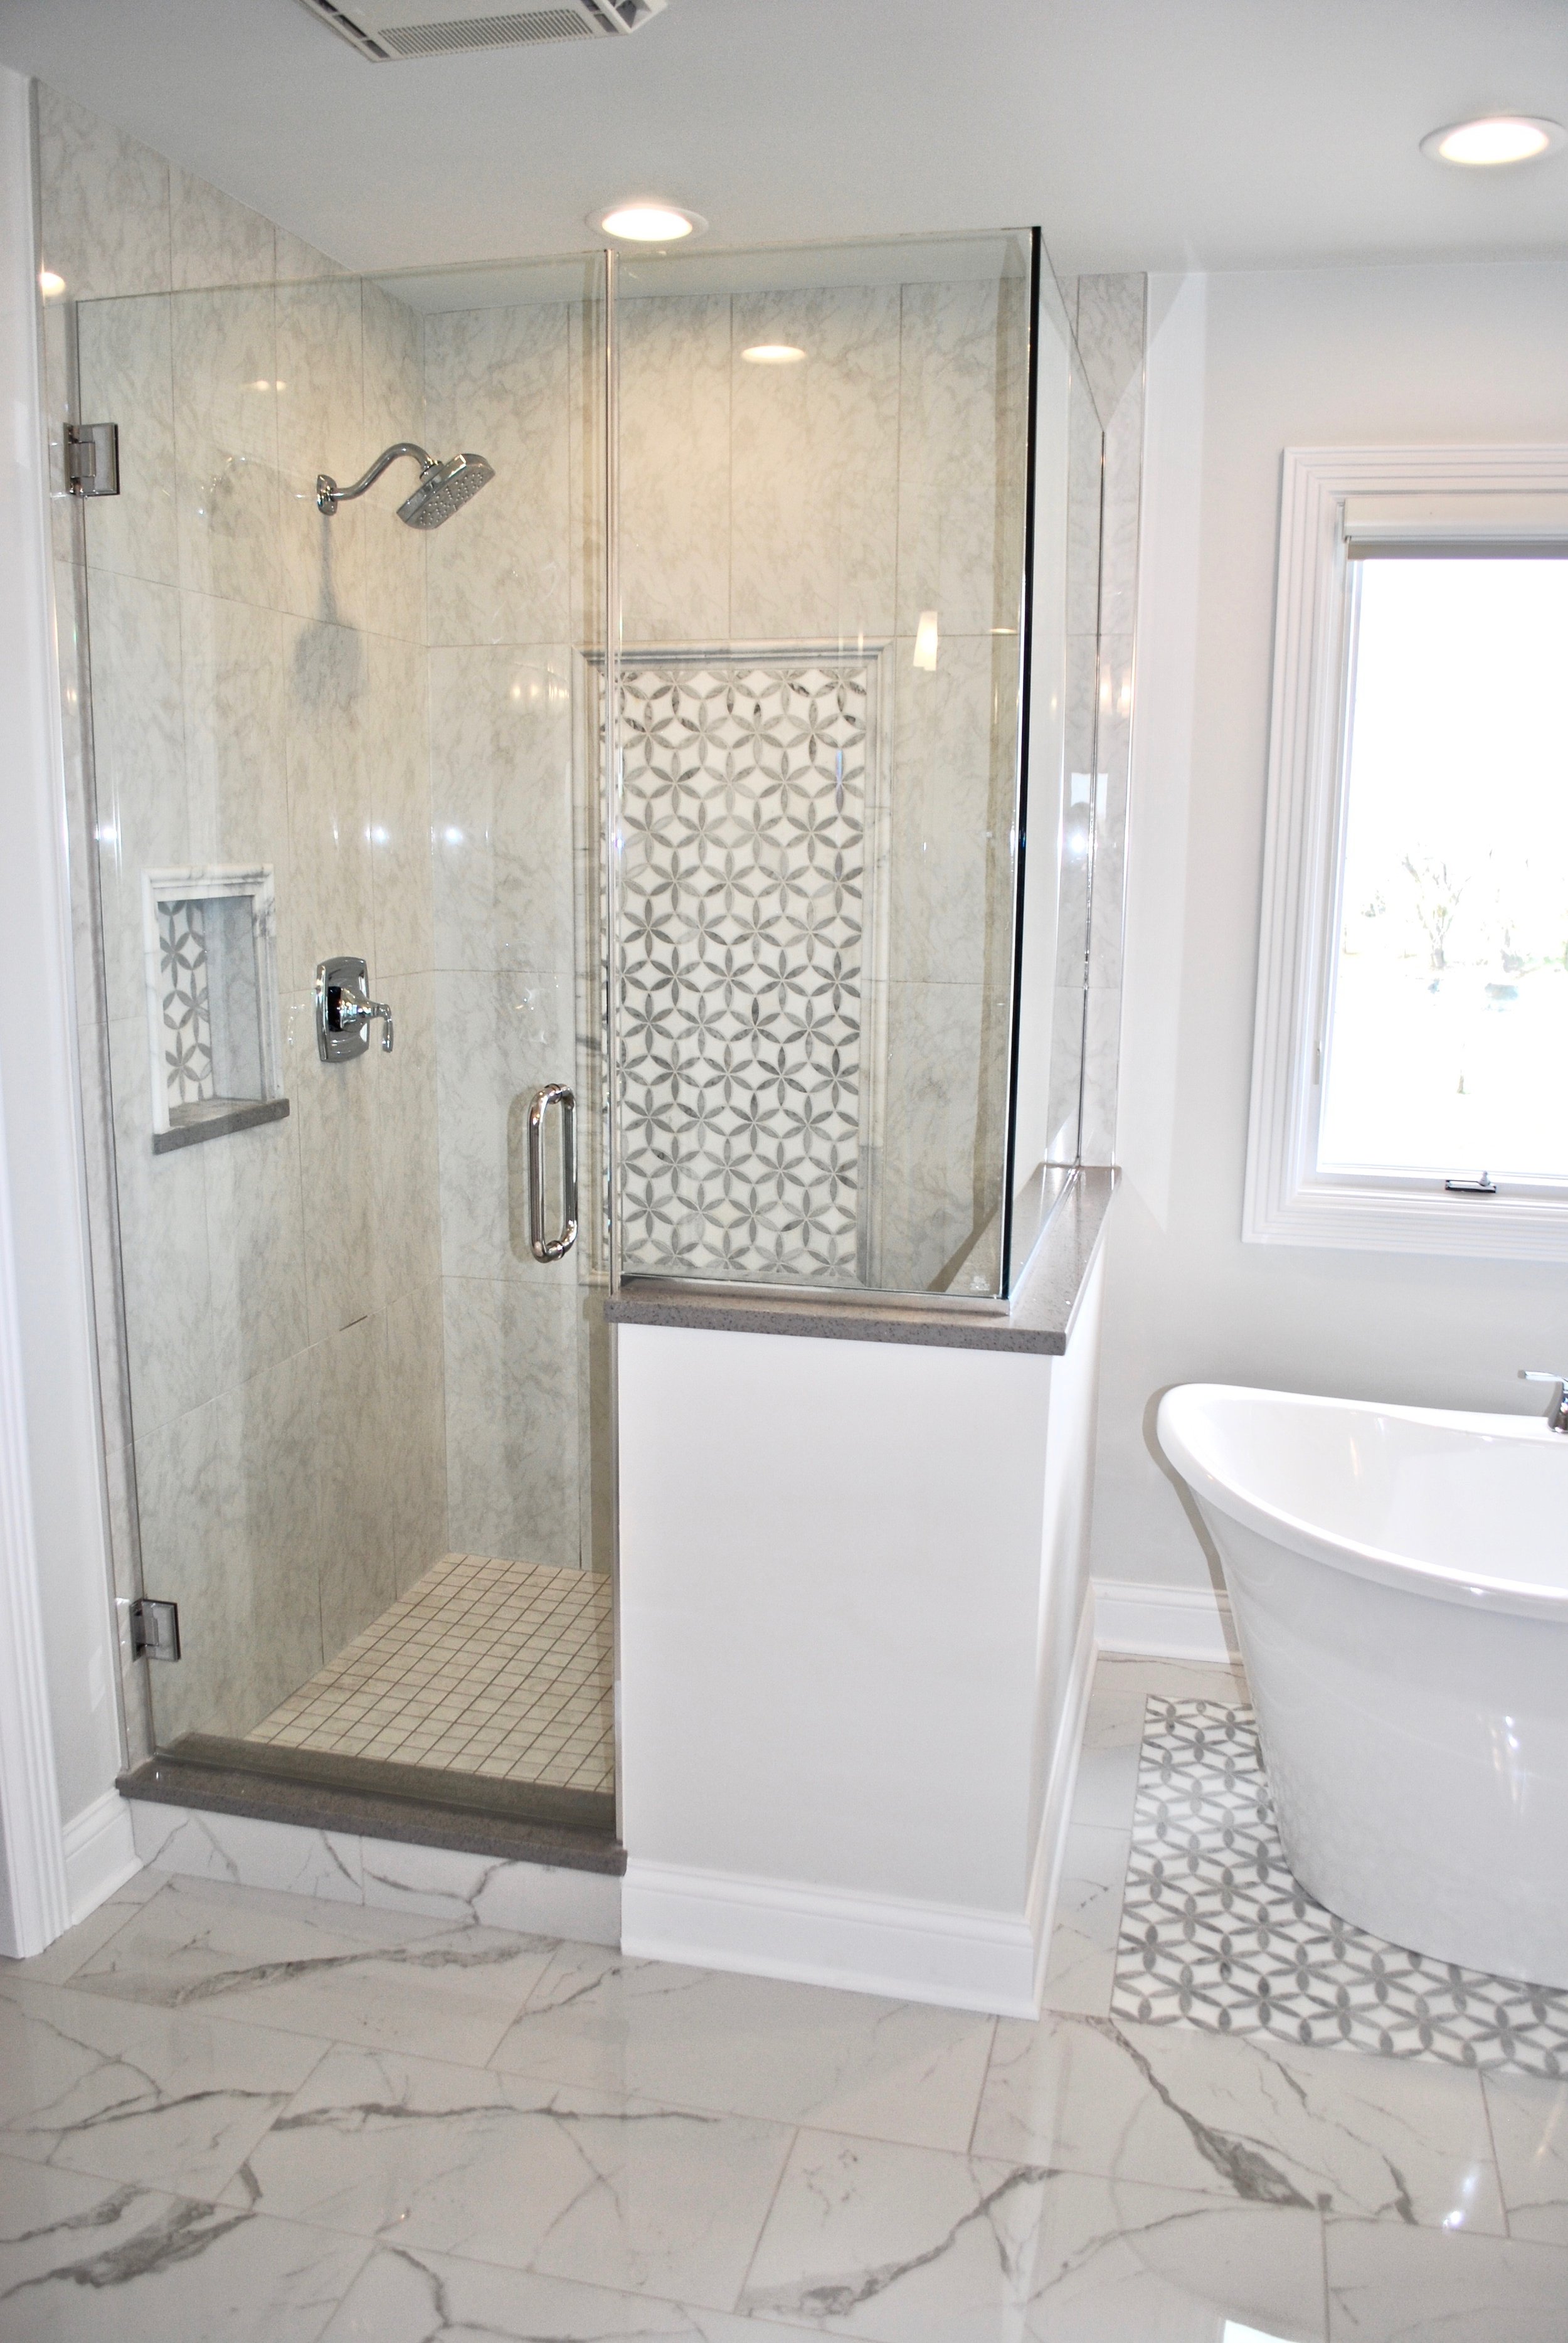 Bathroom Remodel with Freestanding Tub